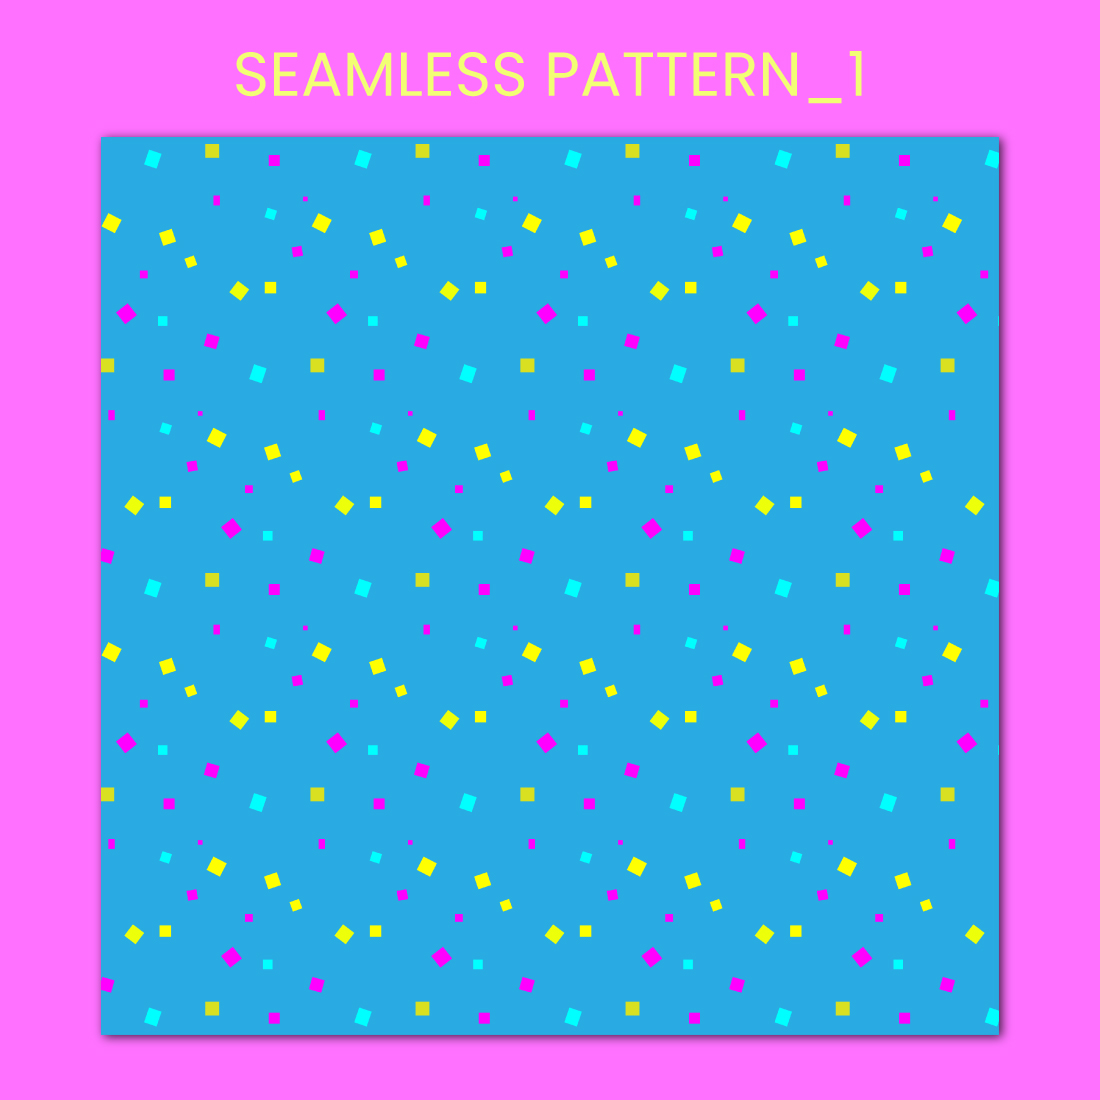 Seamless Pattern cover image.